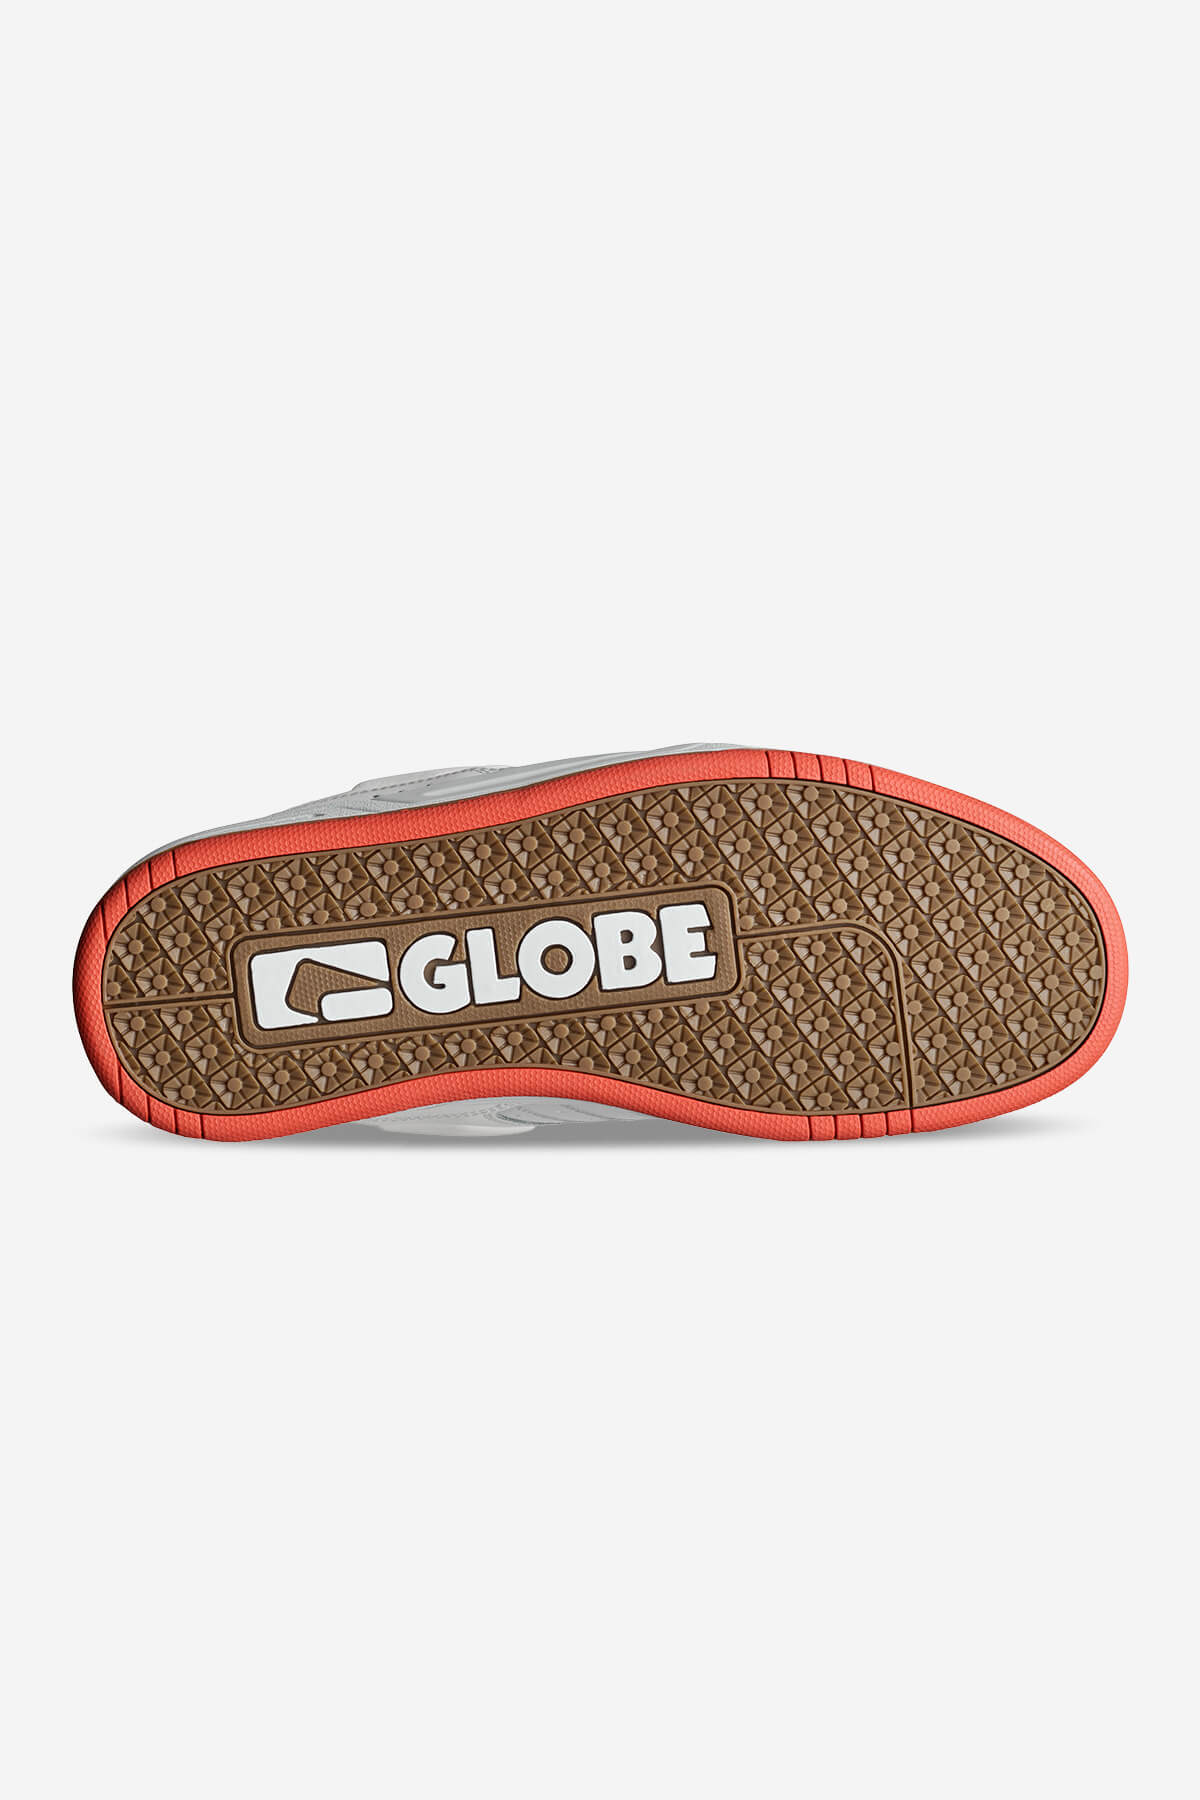 Globe - Fusion - White/Red - Skate Shoes